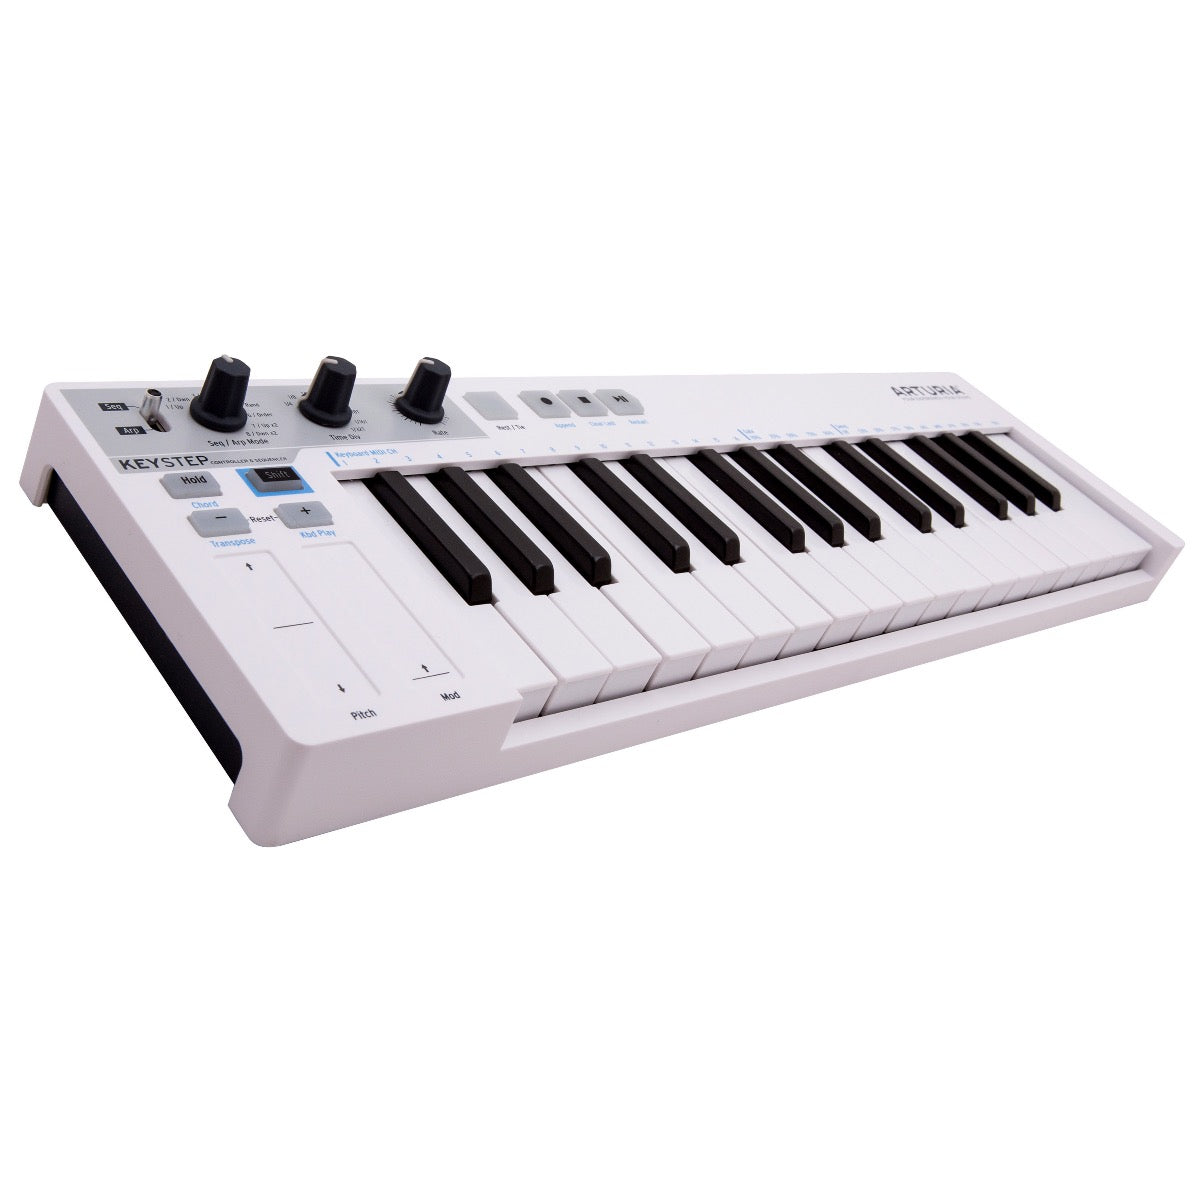 Arturia KeyStep Controller and Sequencer